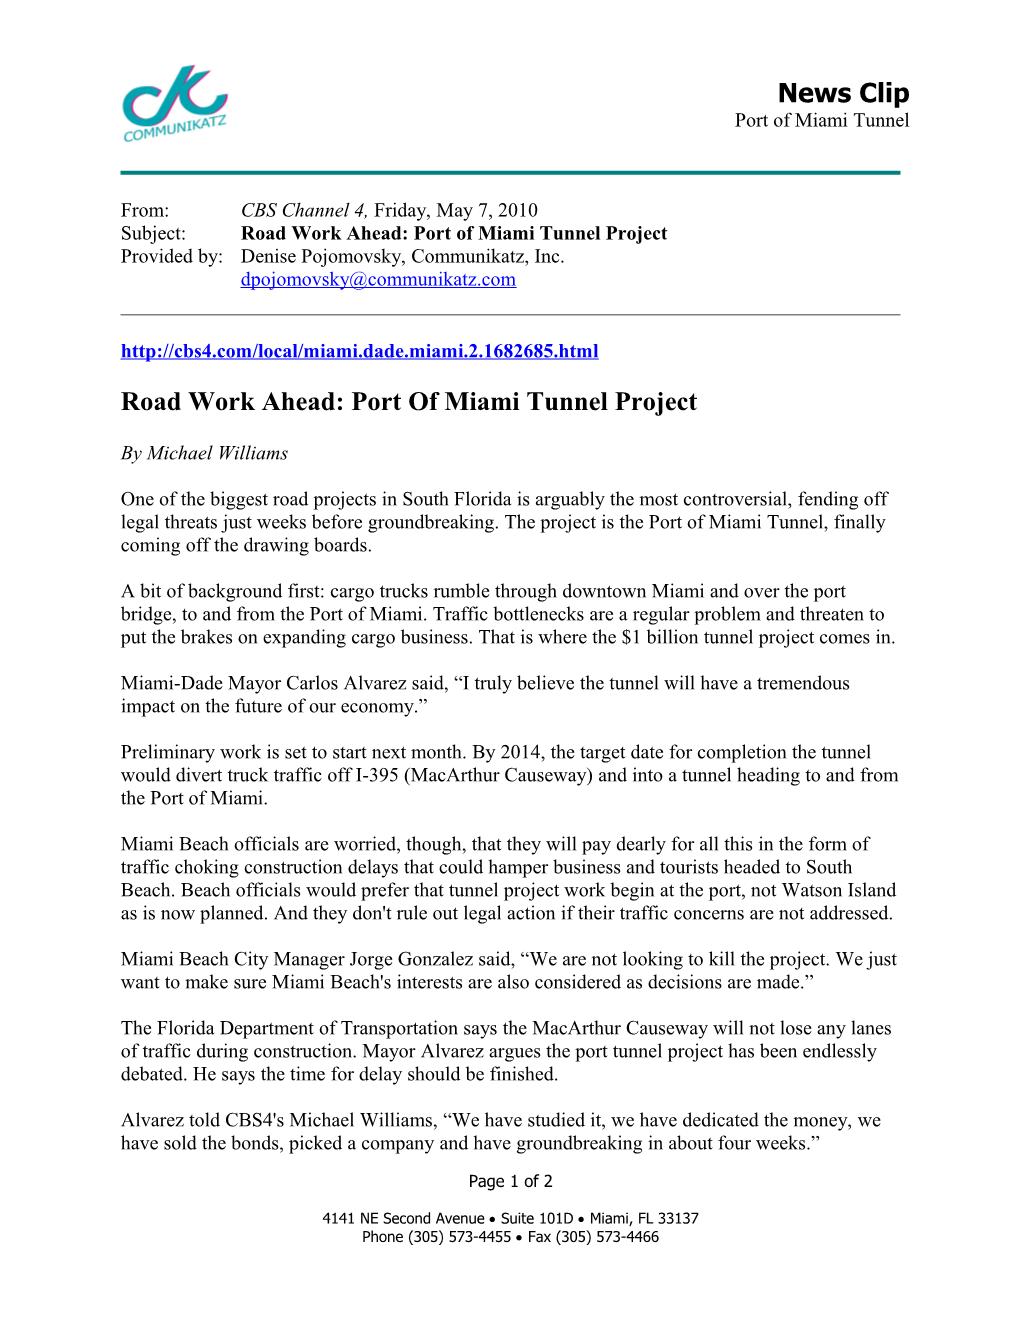 Subject: Road Work Ahead: Port of Miami Tunnel Project